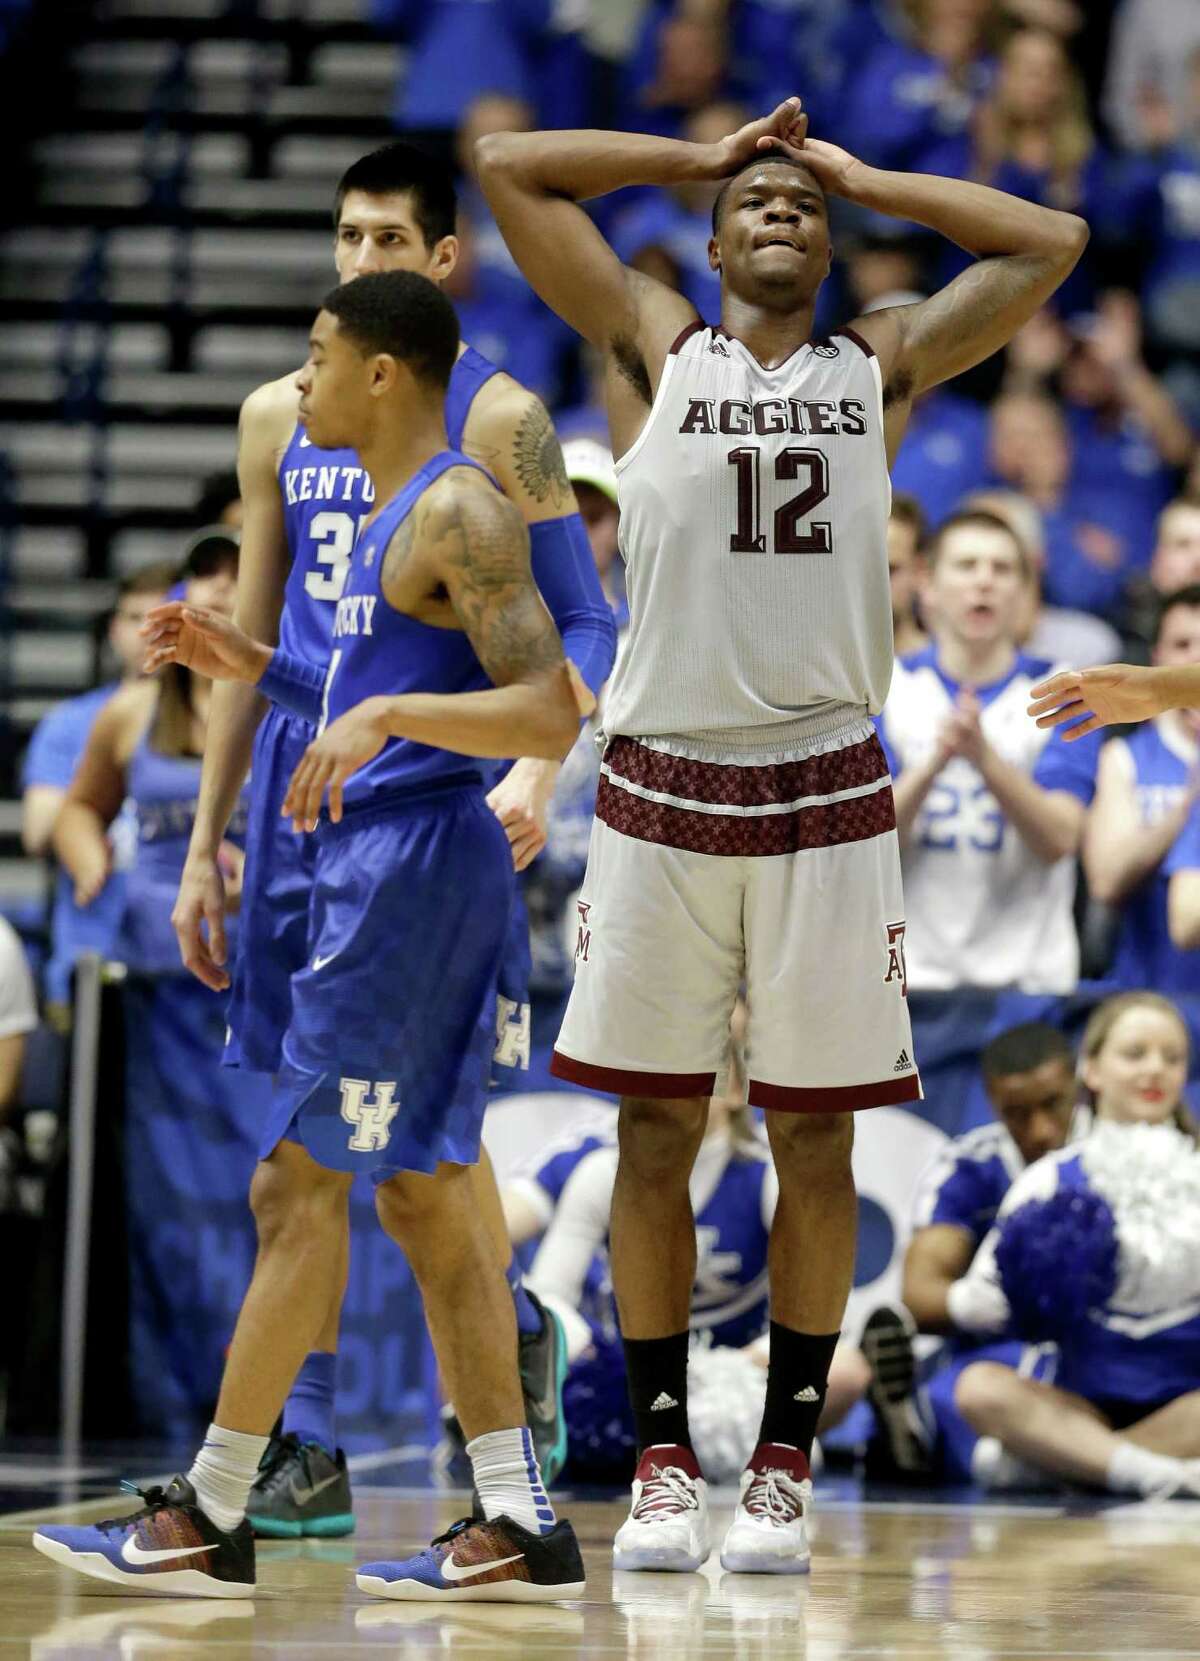 Texas A&M's Jalen Jones (12) reacts to being called for a foul against Kentucky during the second half of an NCAA college basketball game in the championship of the Southeastern Conference tournament in Nashville, Tenn., Sunday, March 13, 2016.